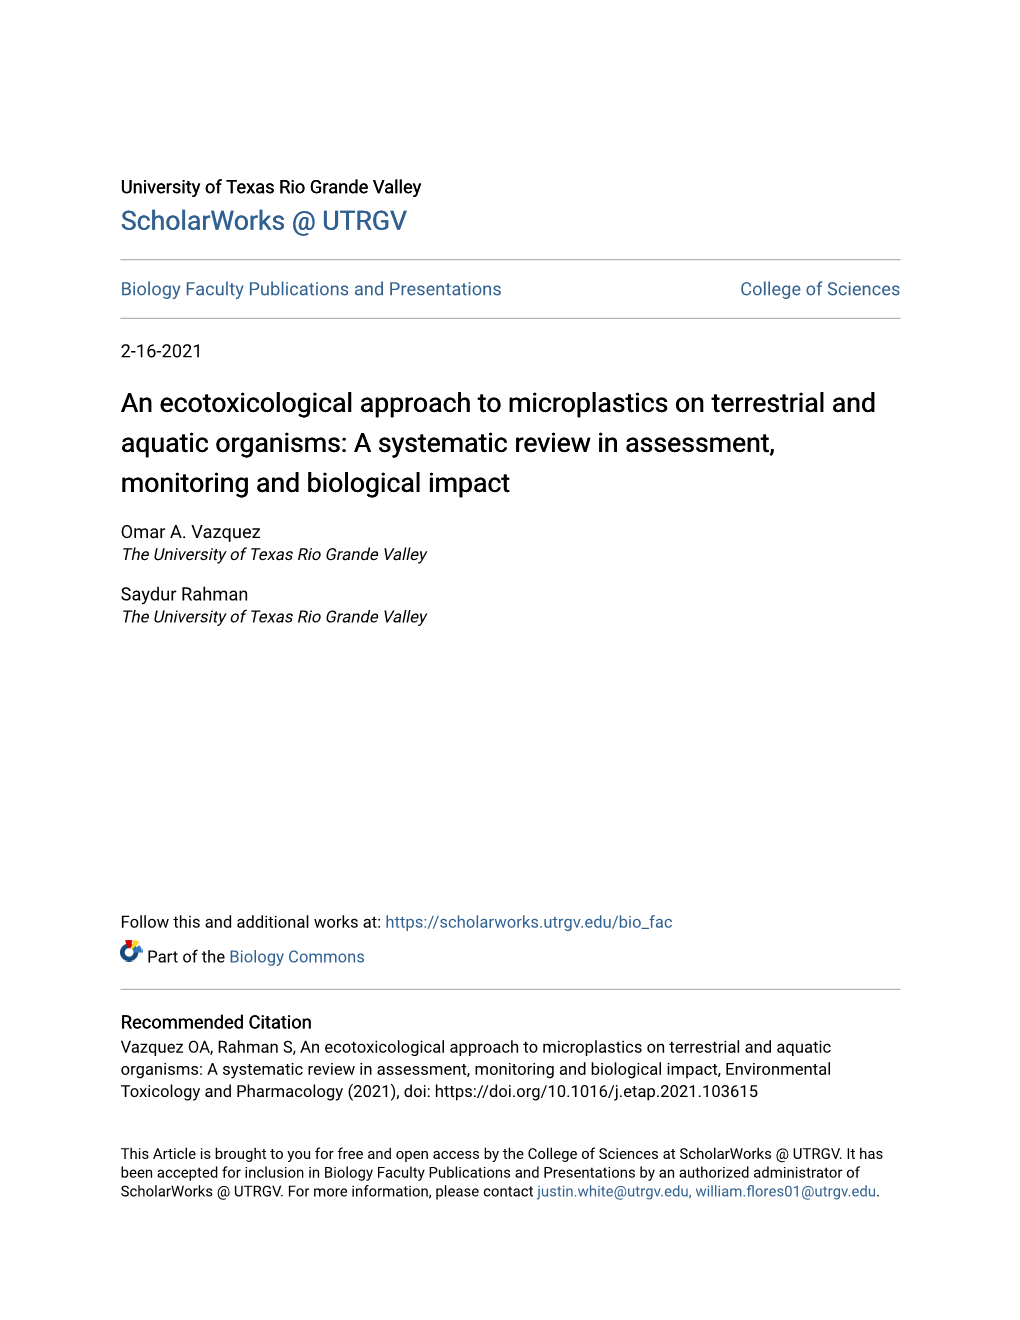 An Ecotoxicological Approach to Microplastics on Terrestrial and Aquatic Organisms: a Systematic Review in Assessment, Monitoring and Biological Impact